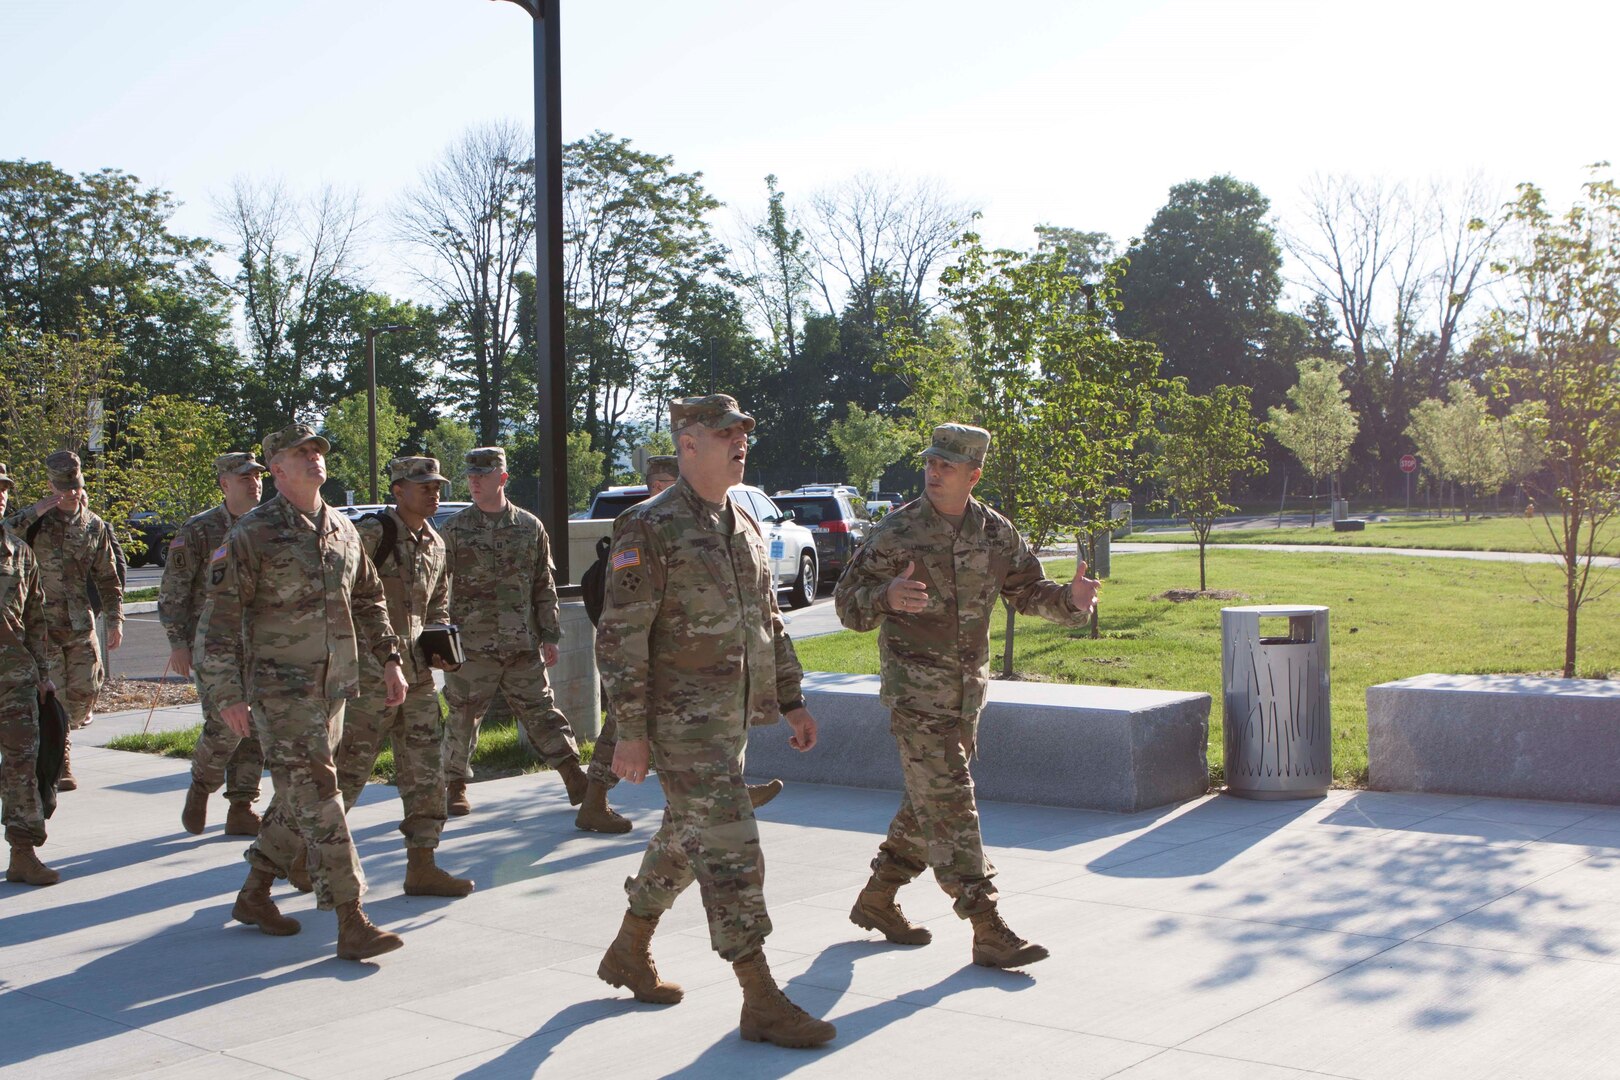 Army Gen. Gustave F. Perna visited DLA Distribution May 18. Perna’s previous visit was to the prior headquarters building and this visit marked his first visit to the new headquarters building. 